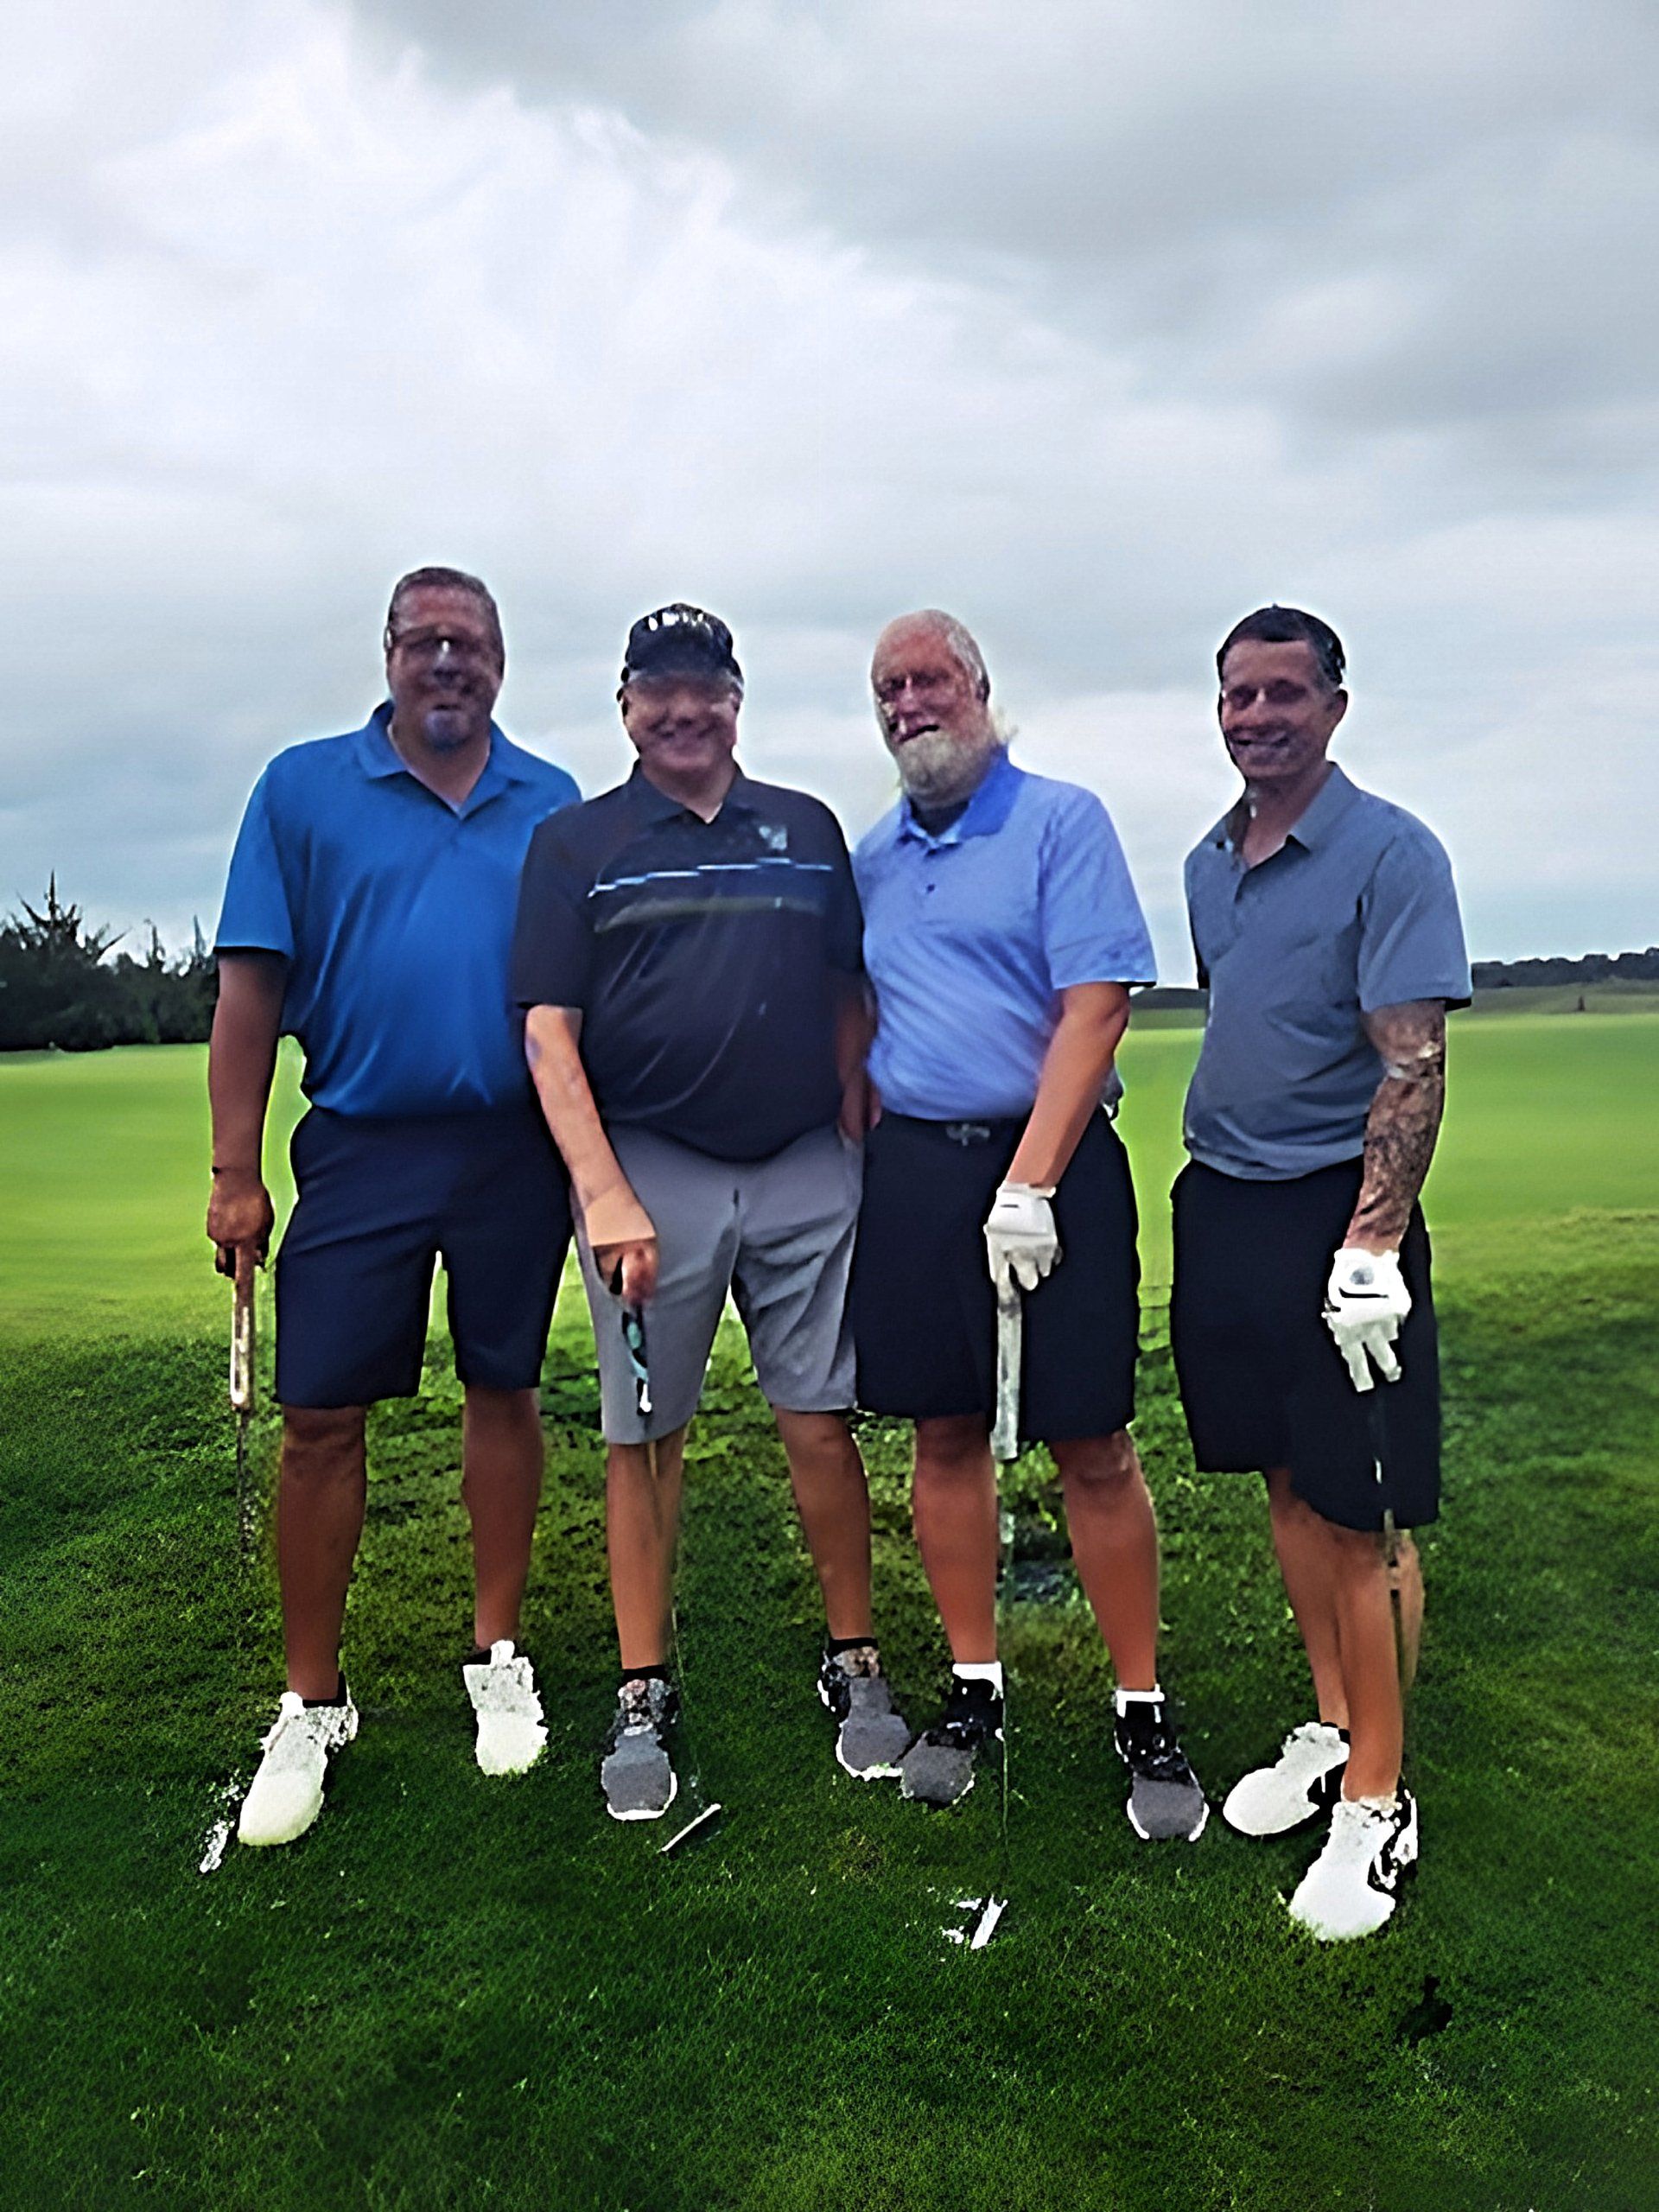 four men are posing for a picture on a golf course